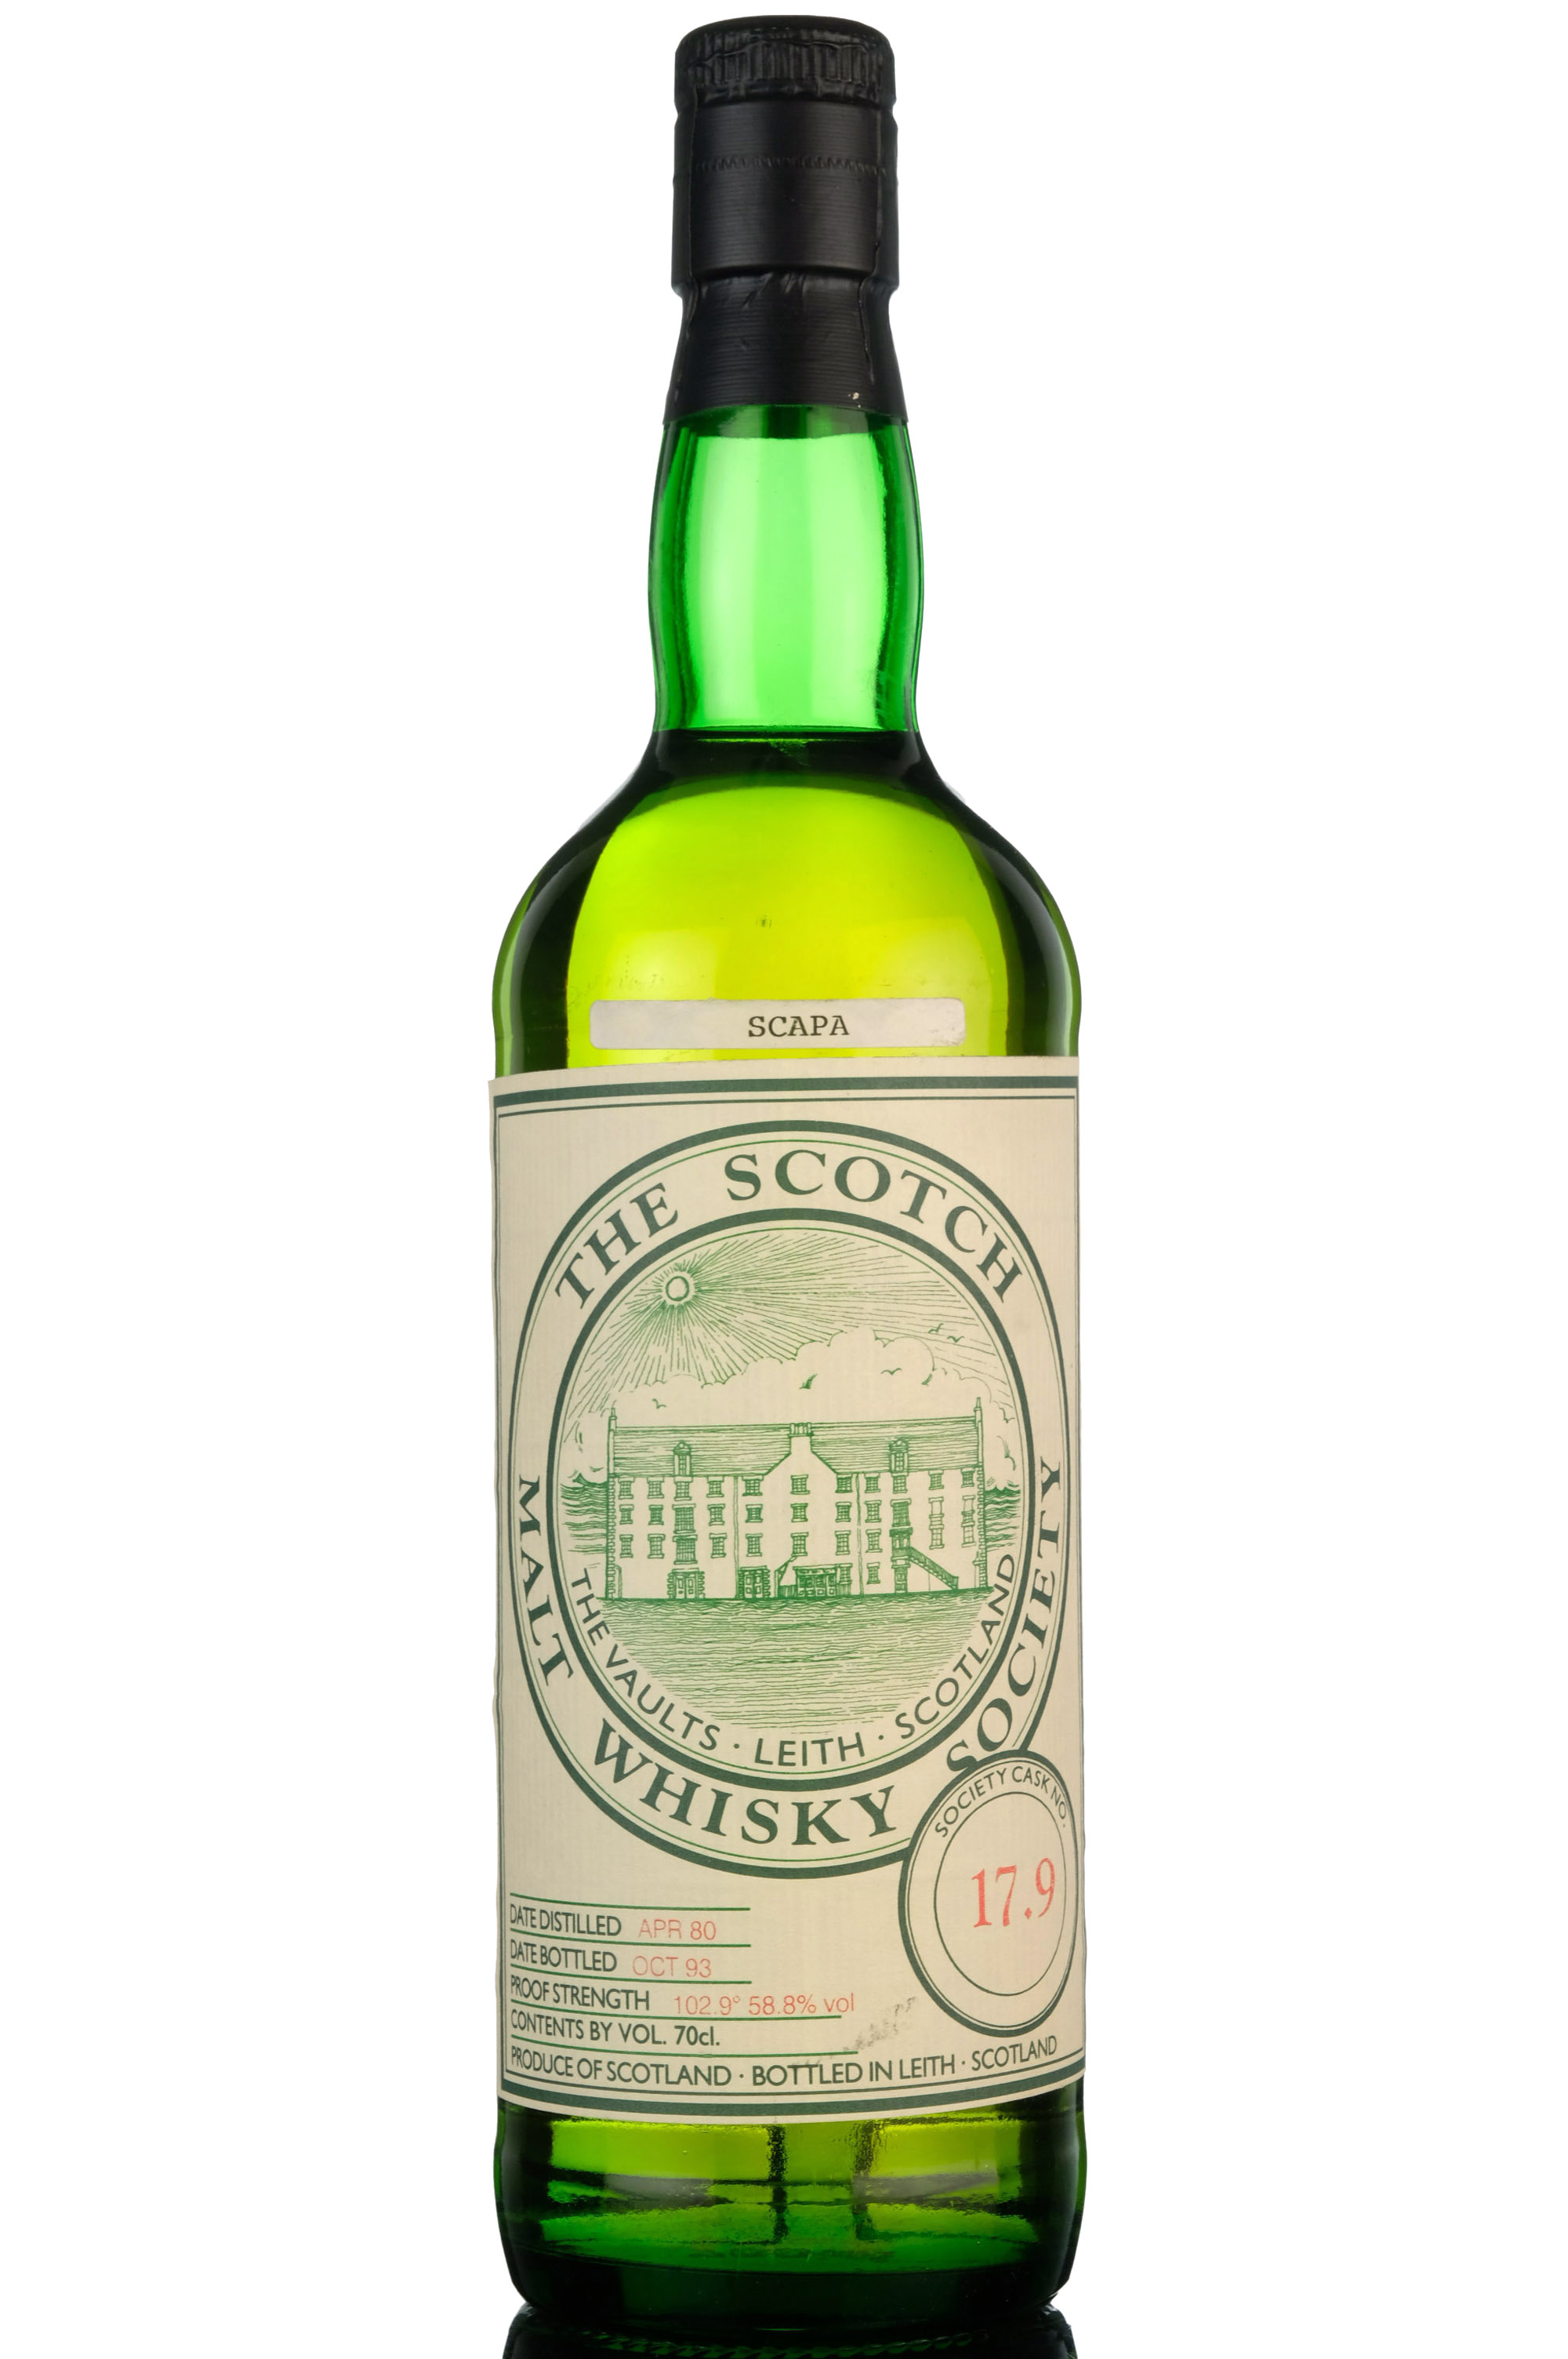 Scapa 1980-1993 - 13 Year Old - SMWS 17.9